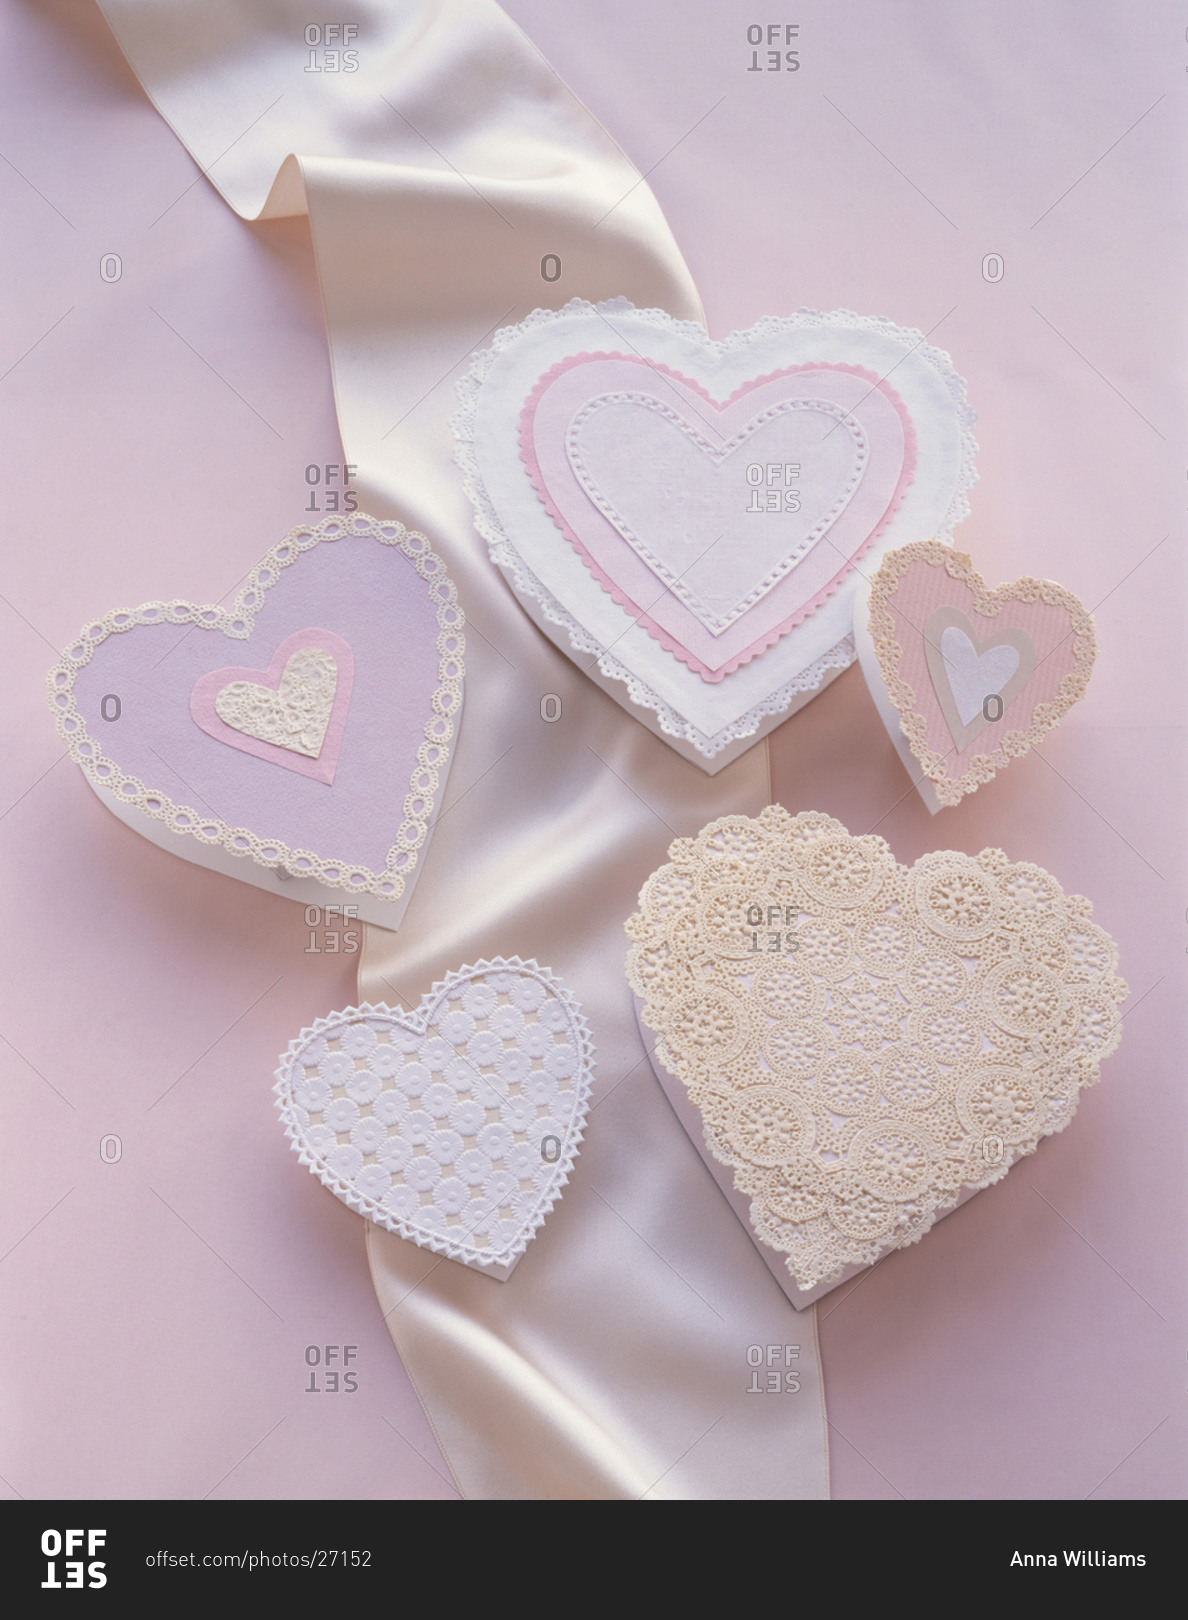 Five handmade heart shaped Valentine's Day cards